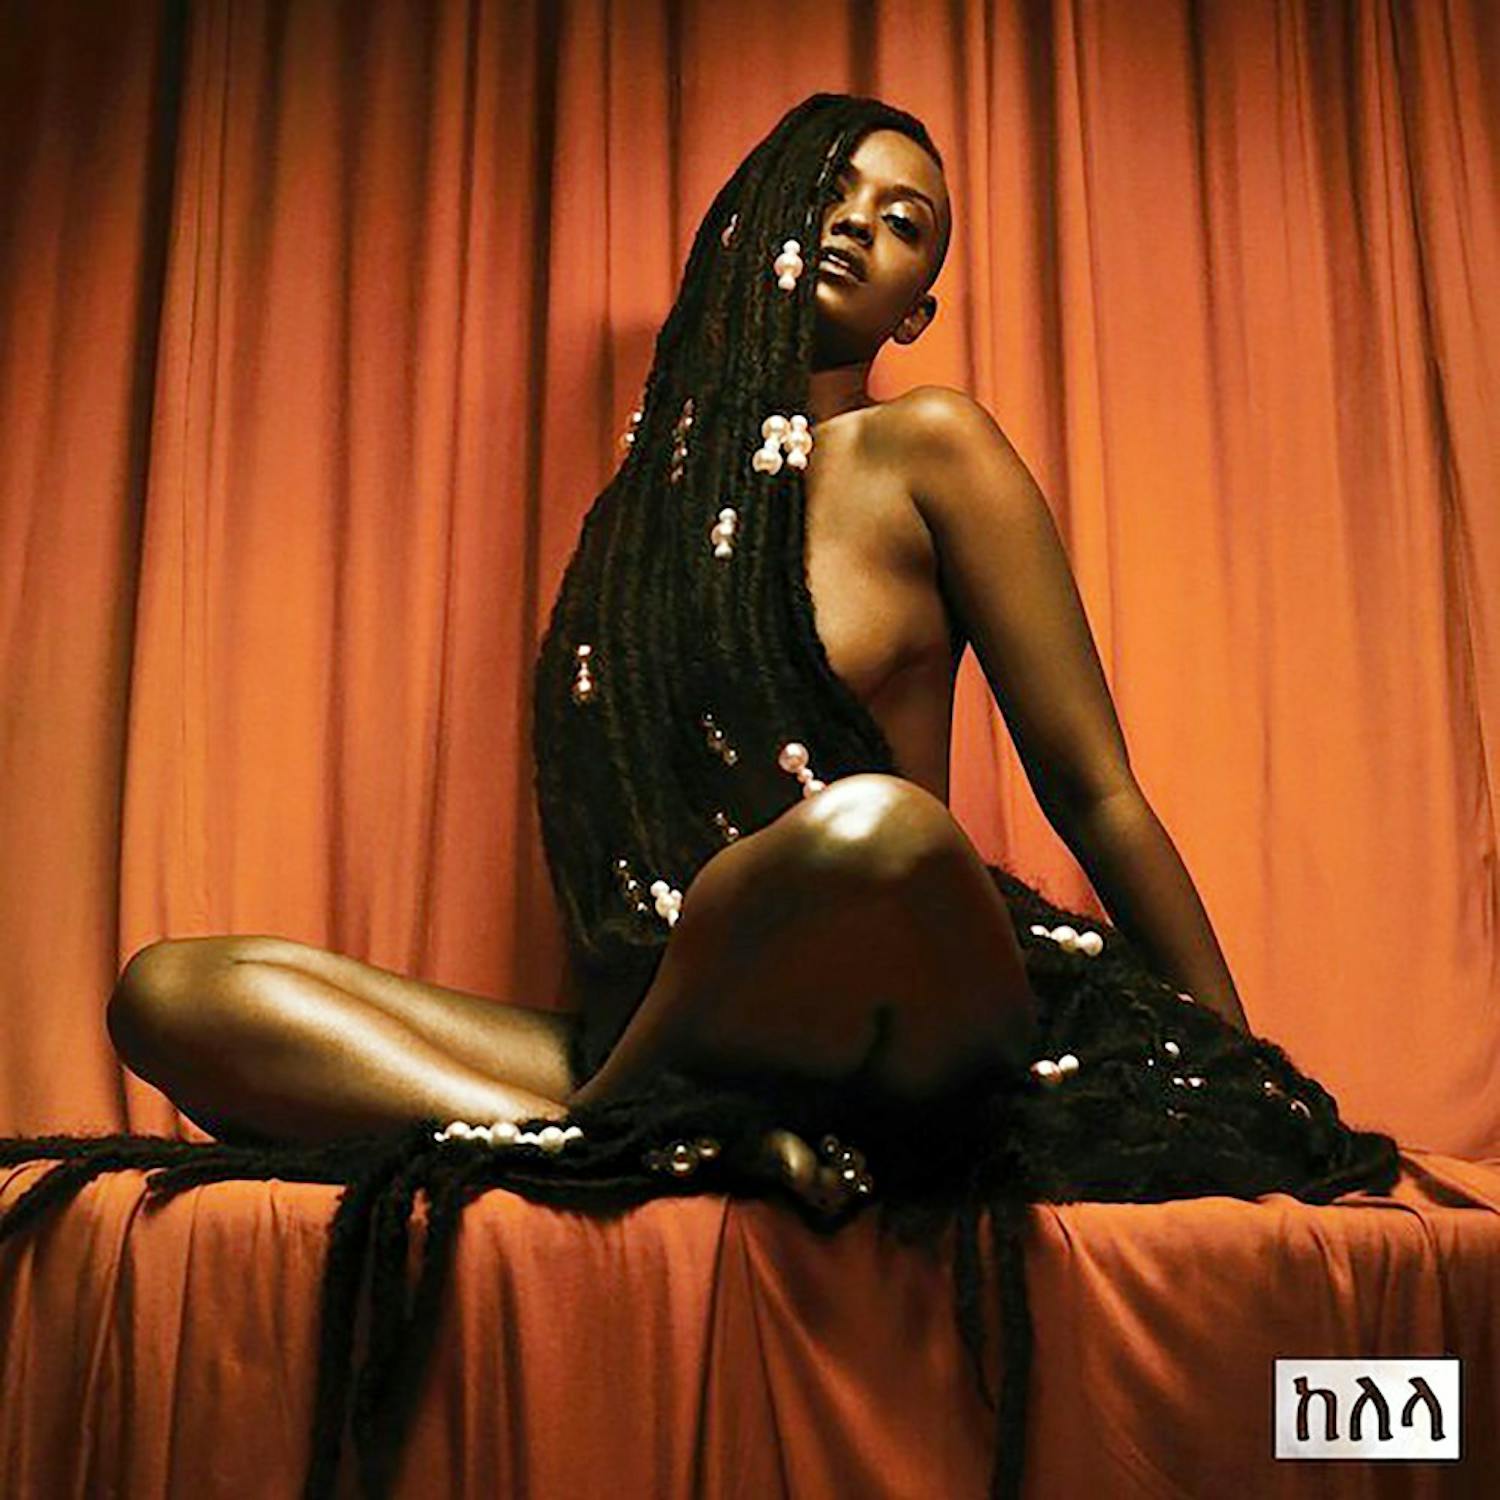 Electronic R&B singer Kelela released her debut project “Take Me Apart” on Friday. The album, the first full-length cut from the singer in four years, contains a variety of upbeat breakup songs and sultry love numbers.